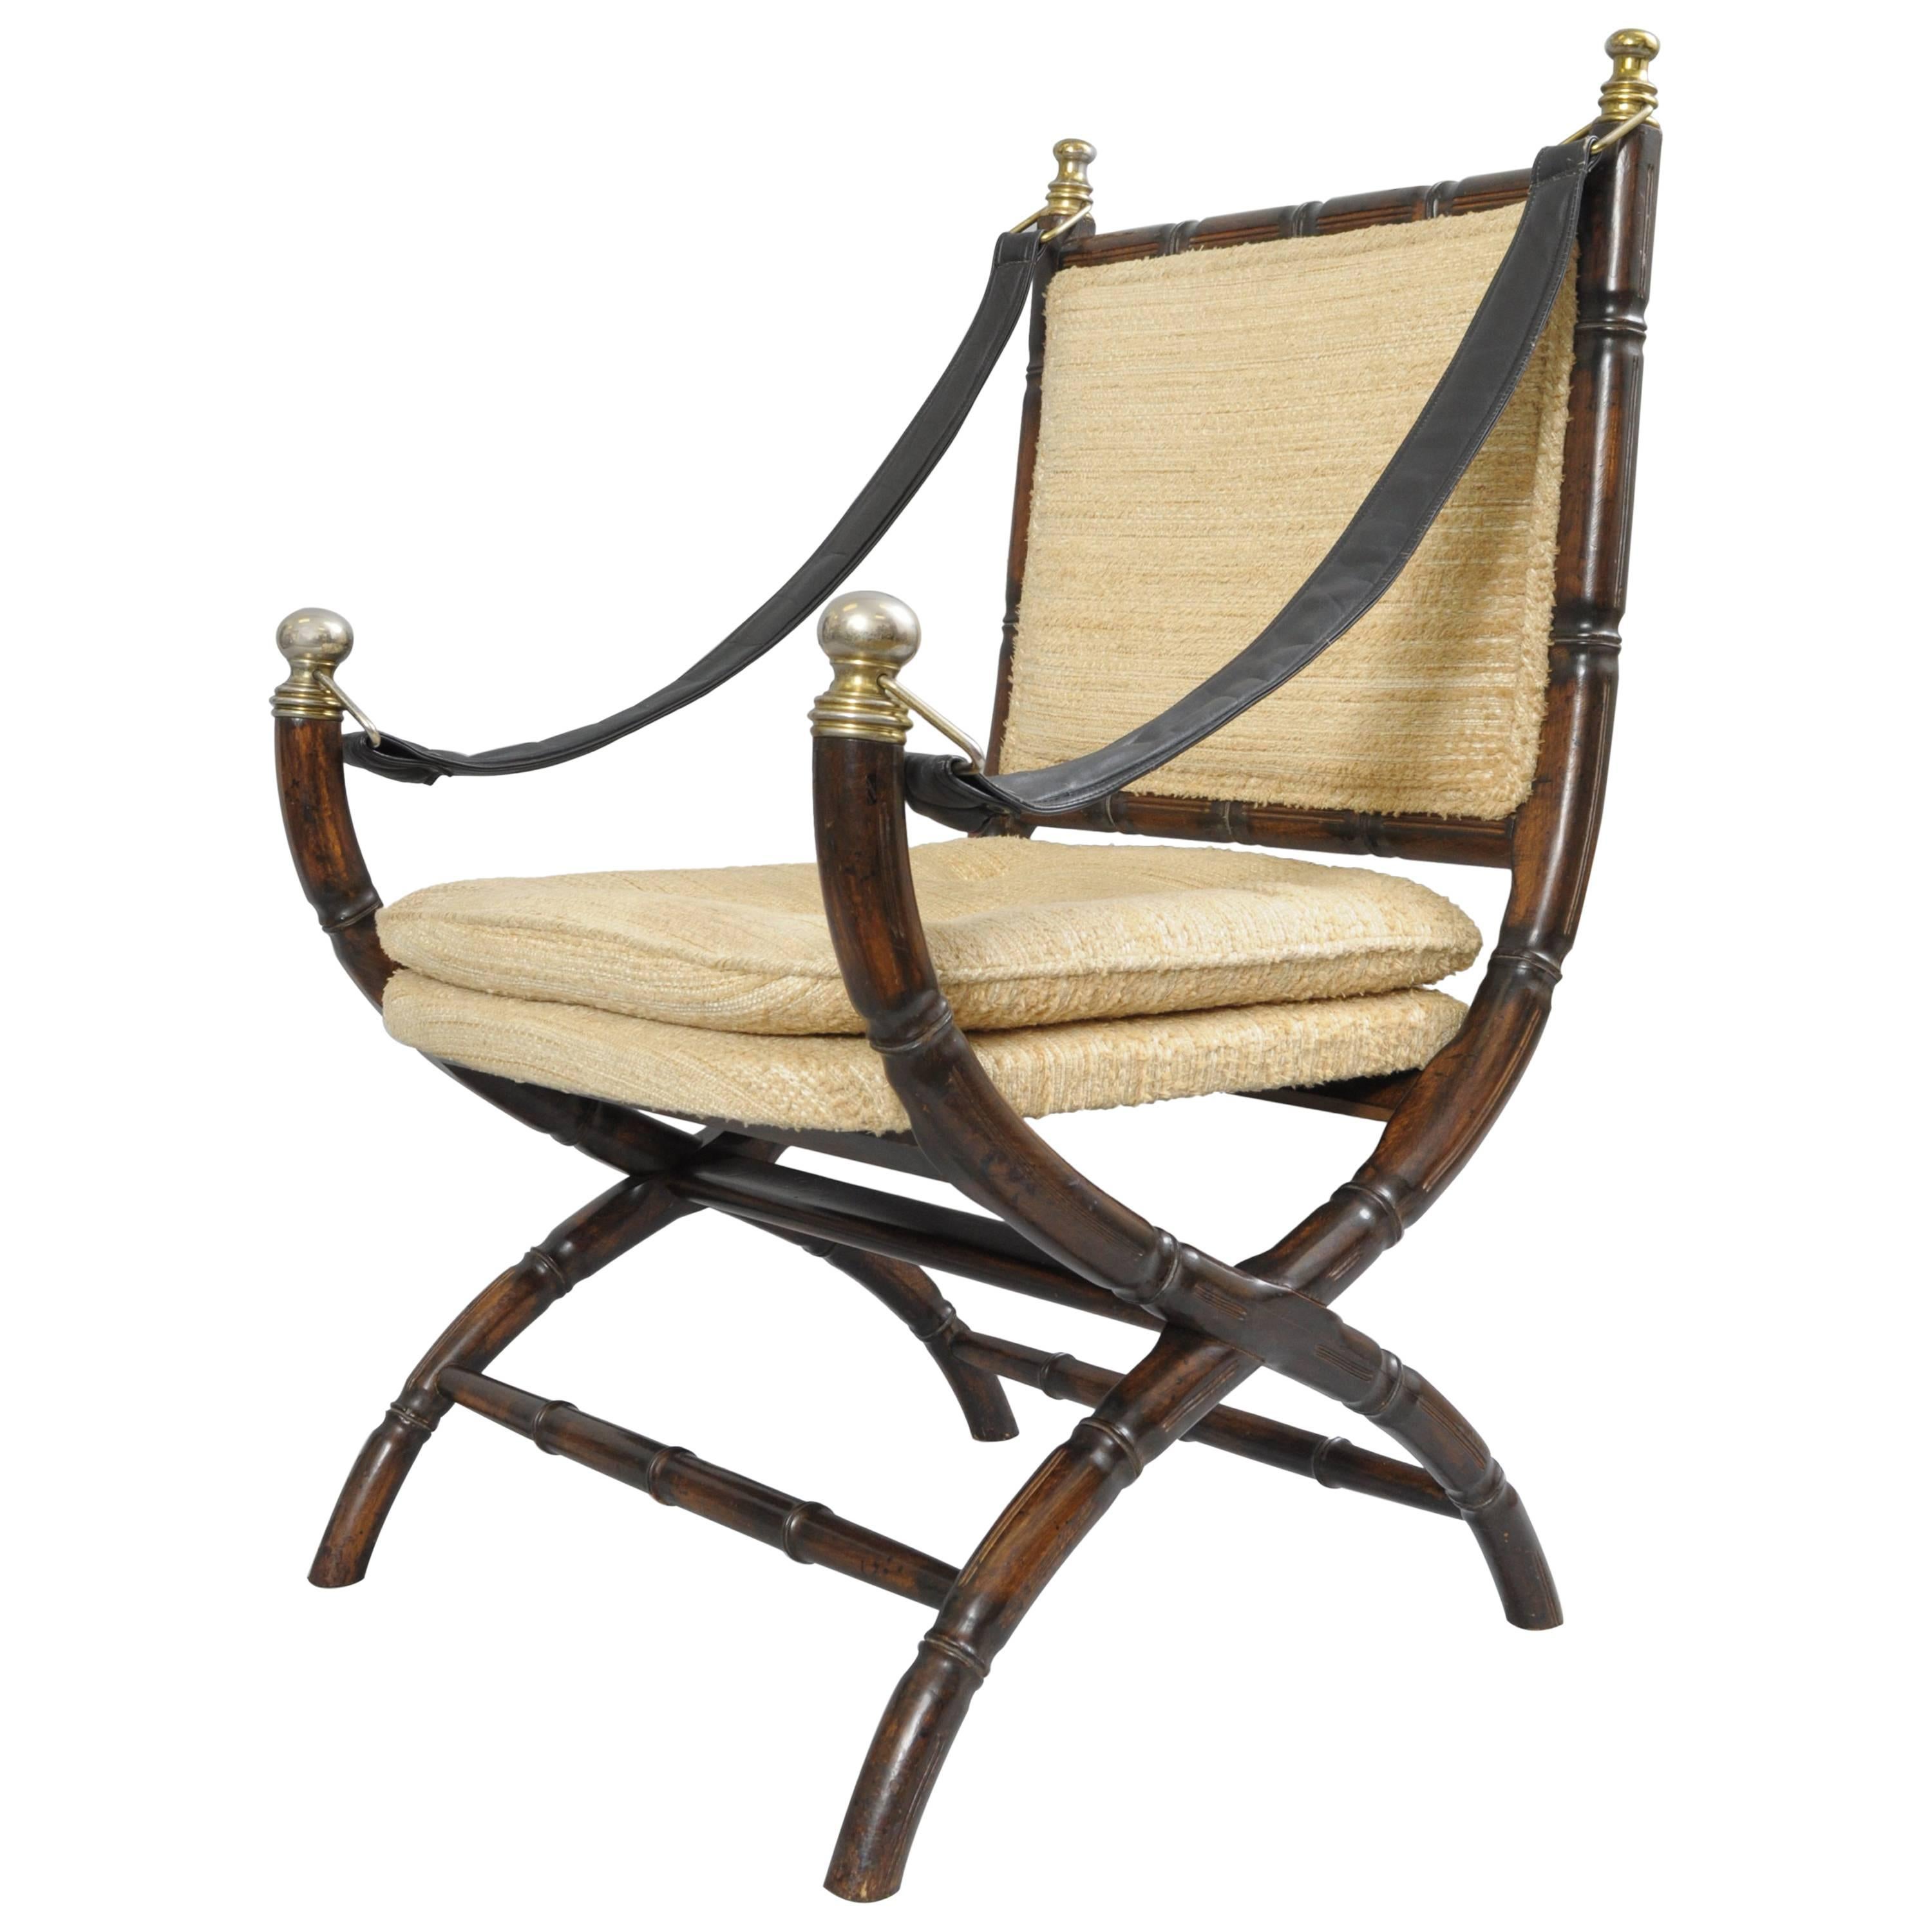 Drexel Campaign Style Faux Bamboo Chair Safari Sling Arm Hollywood Regency